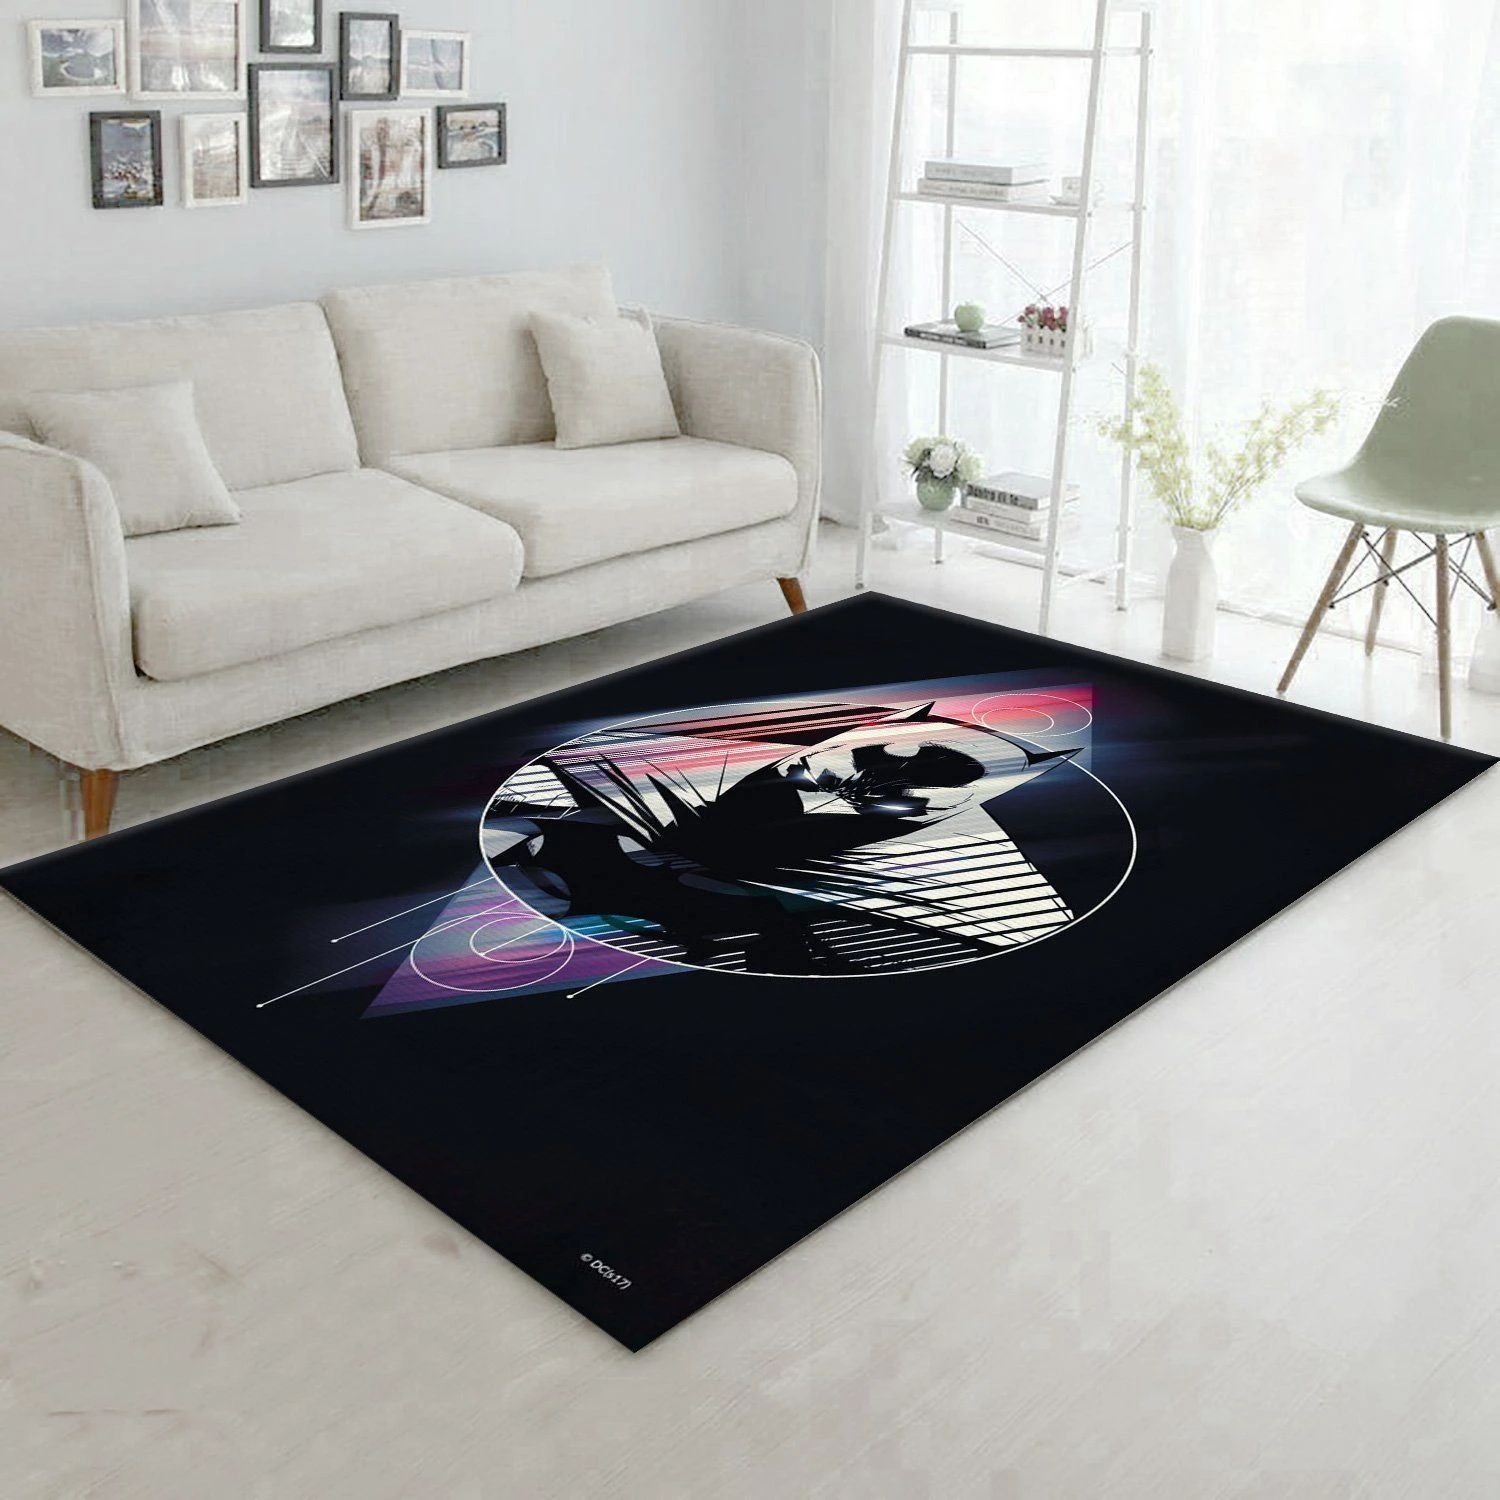 Full Moon Movie Area Rug, Living room and bedroom Rug, US Gift Decor - Indoor Outdoor Rugs 1